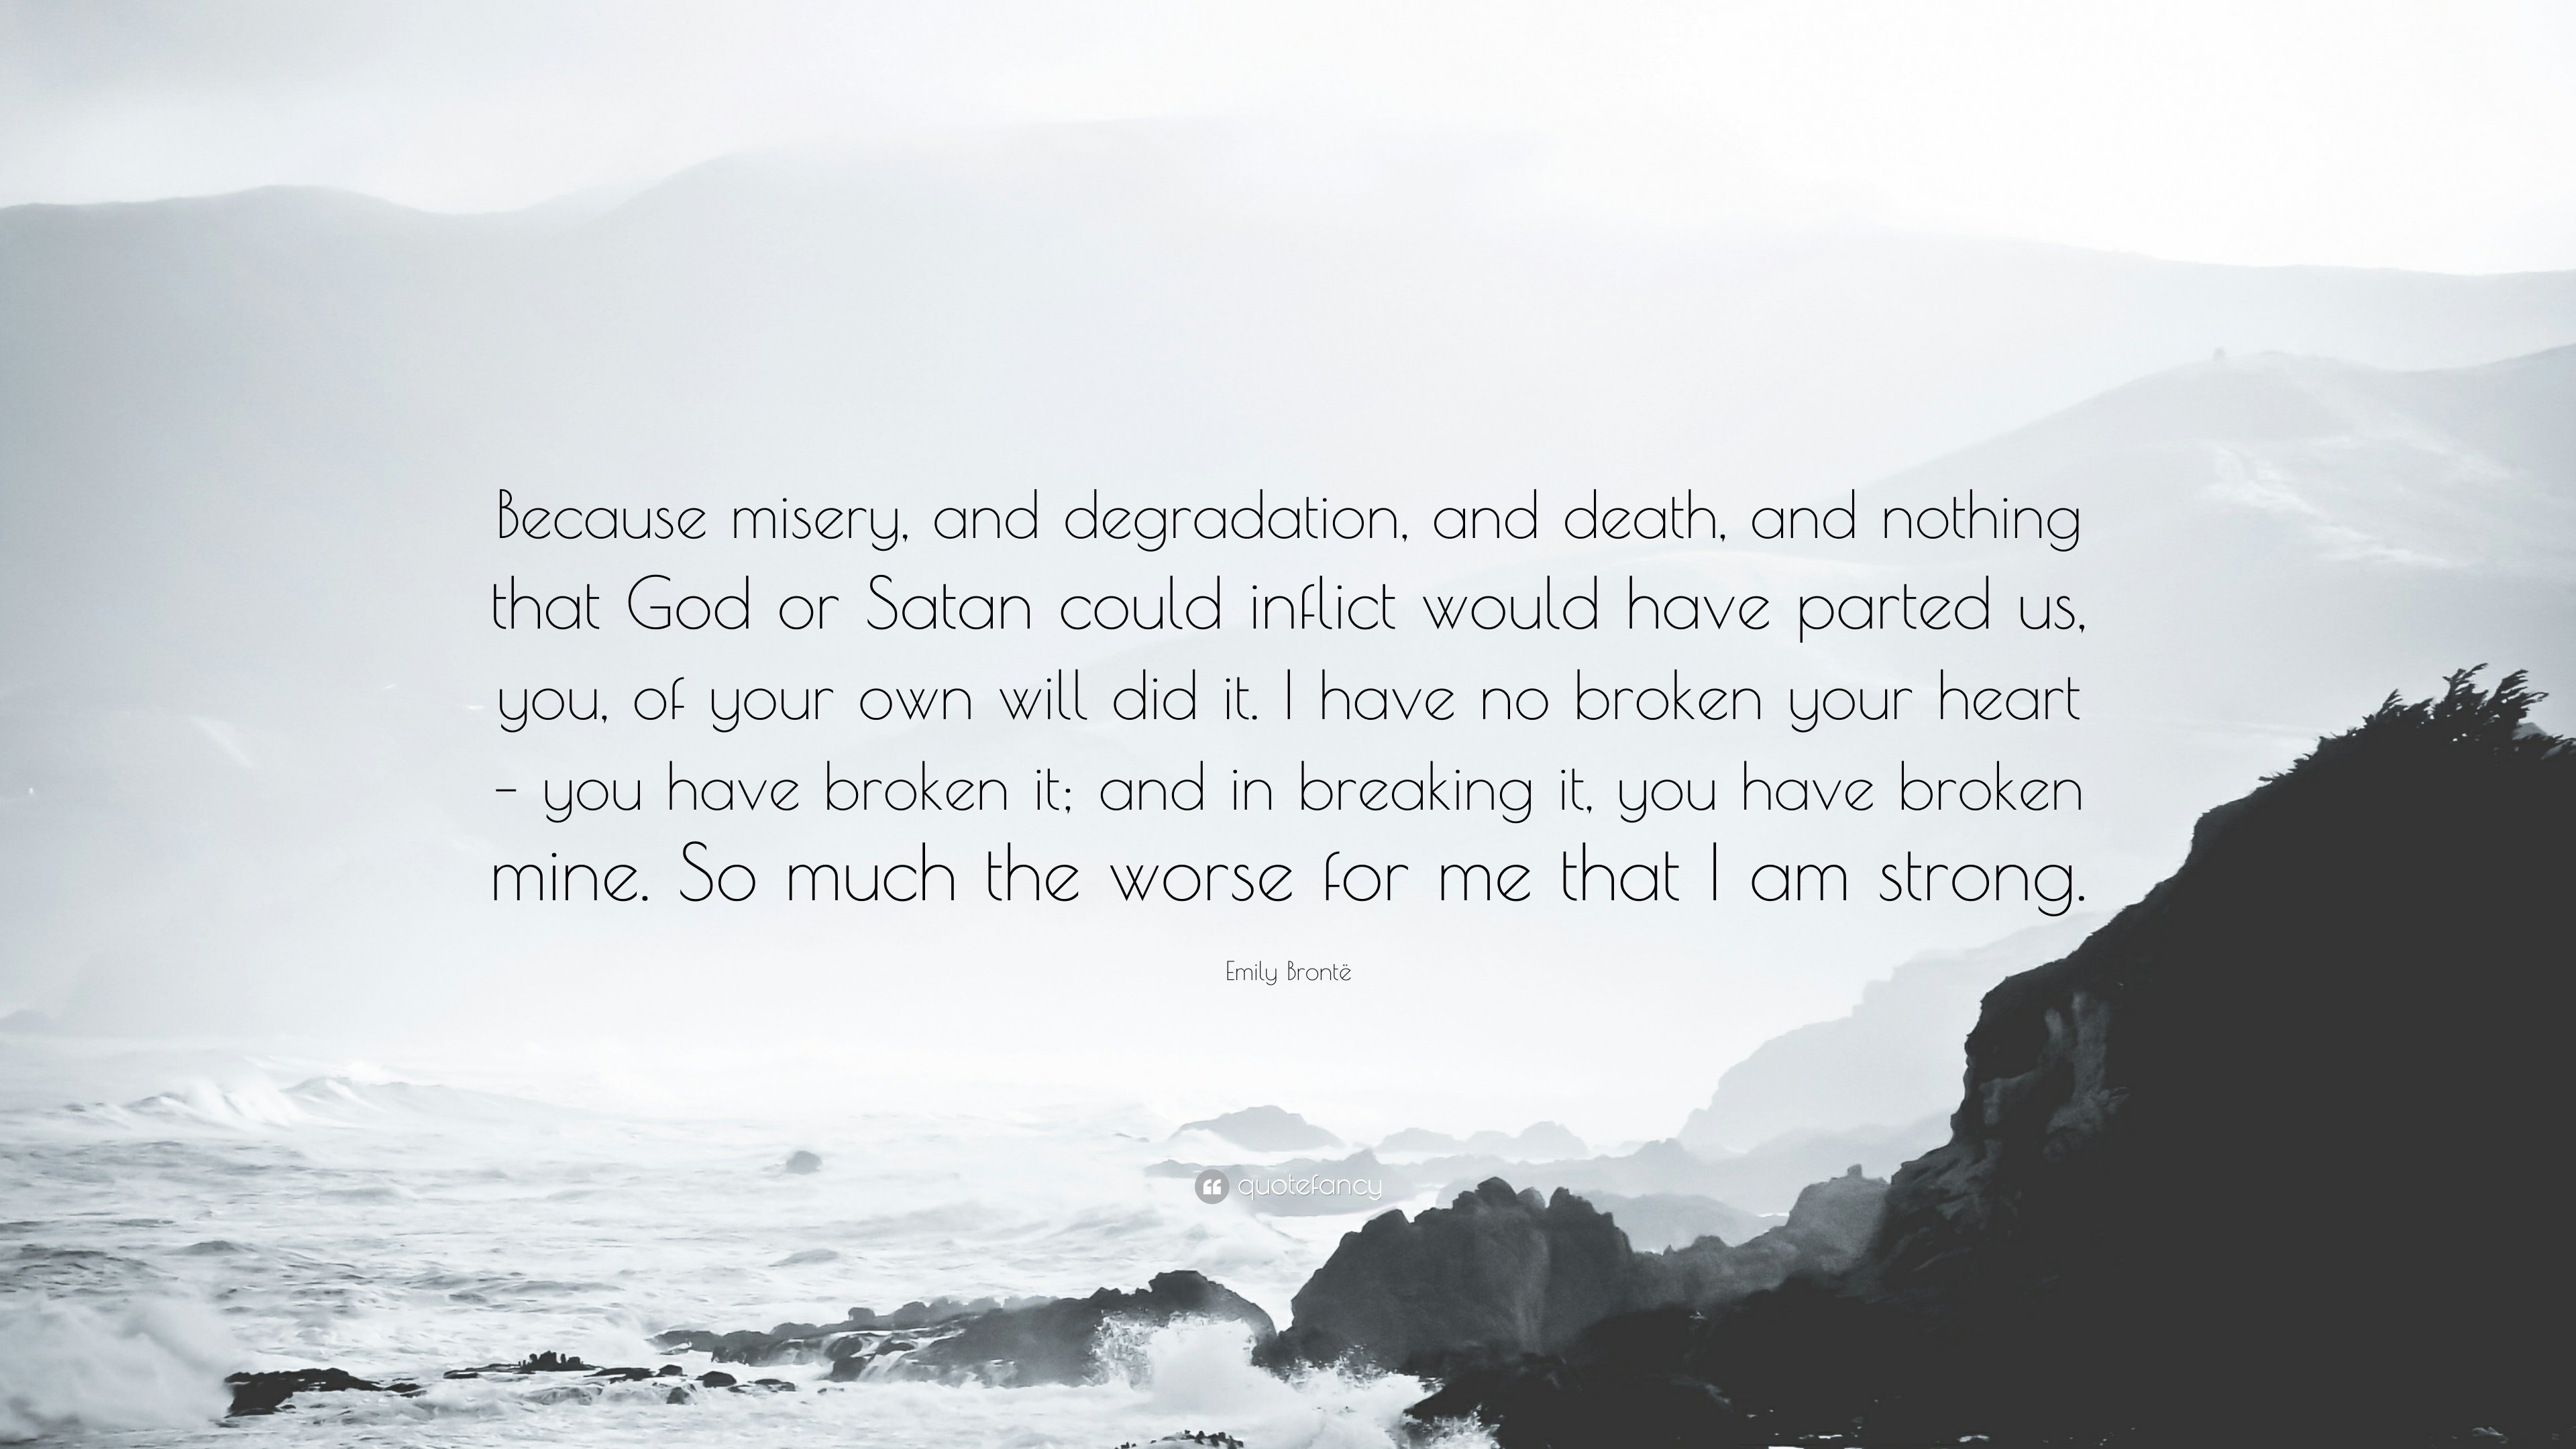 Emily Brontë Quote: “Because misery, and degradation, and death